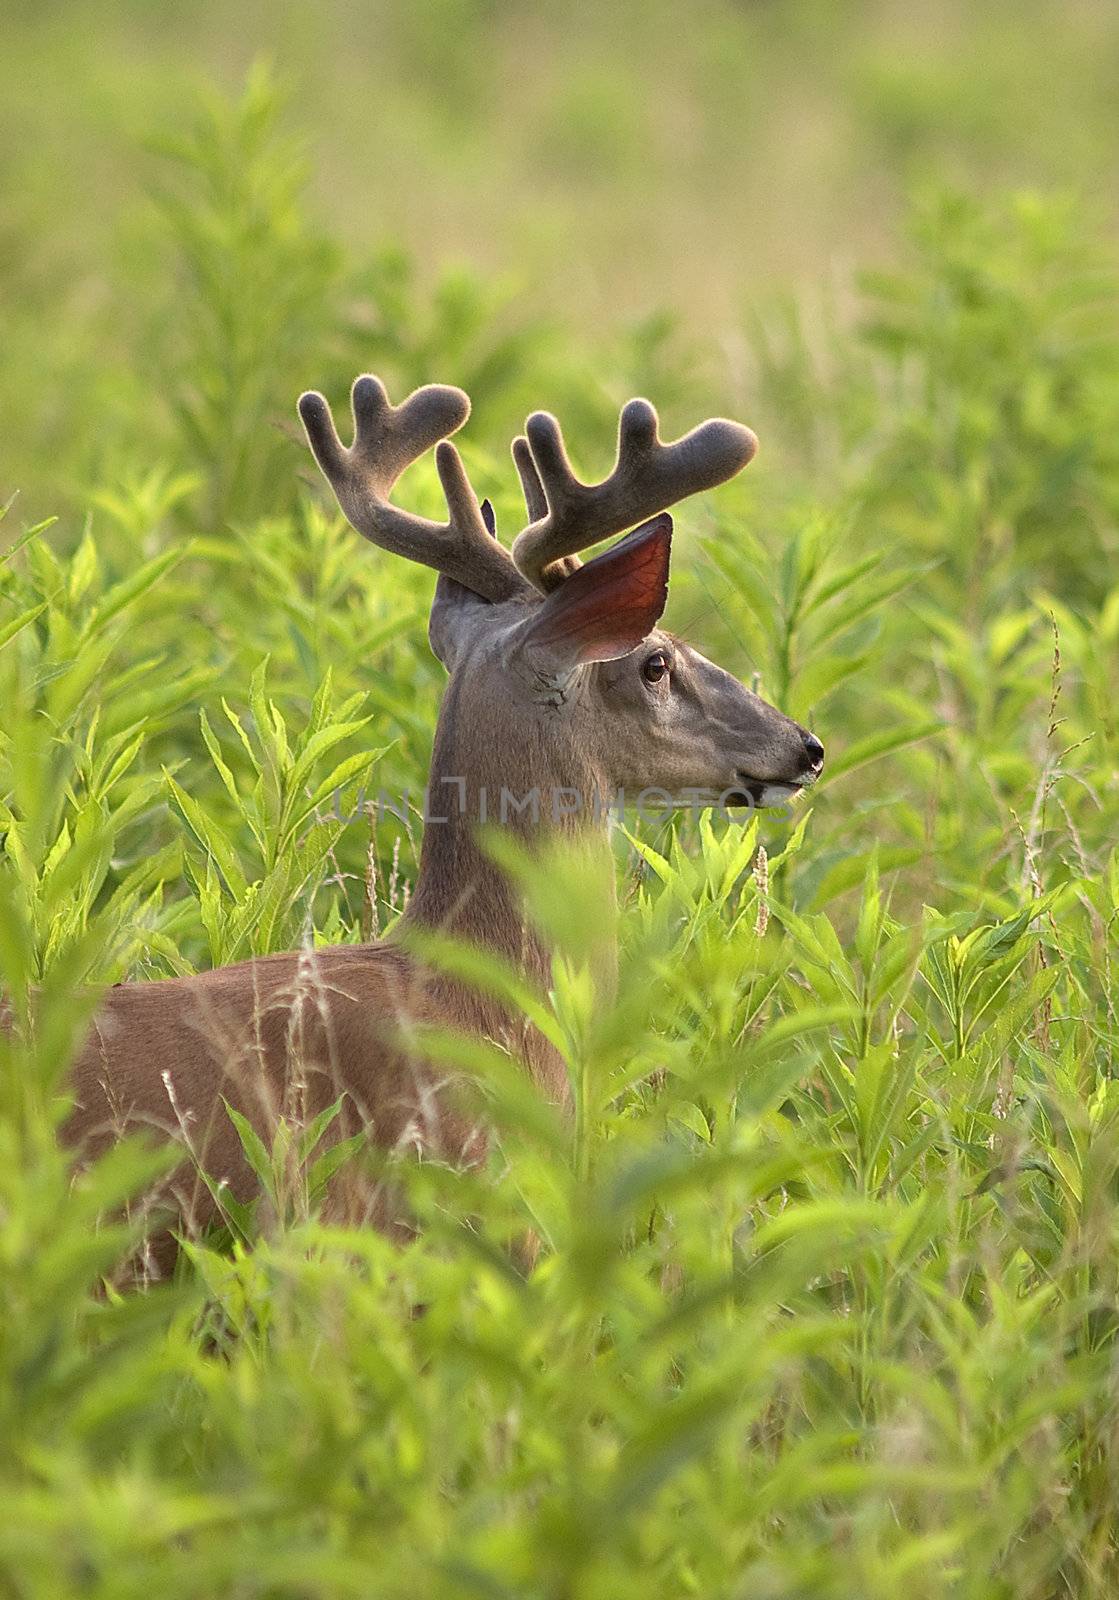 A young White Tailed Deer buck with velvet antlers standing in a field